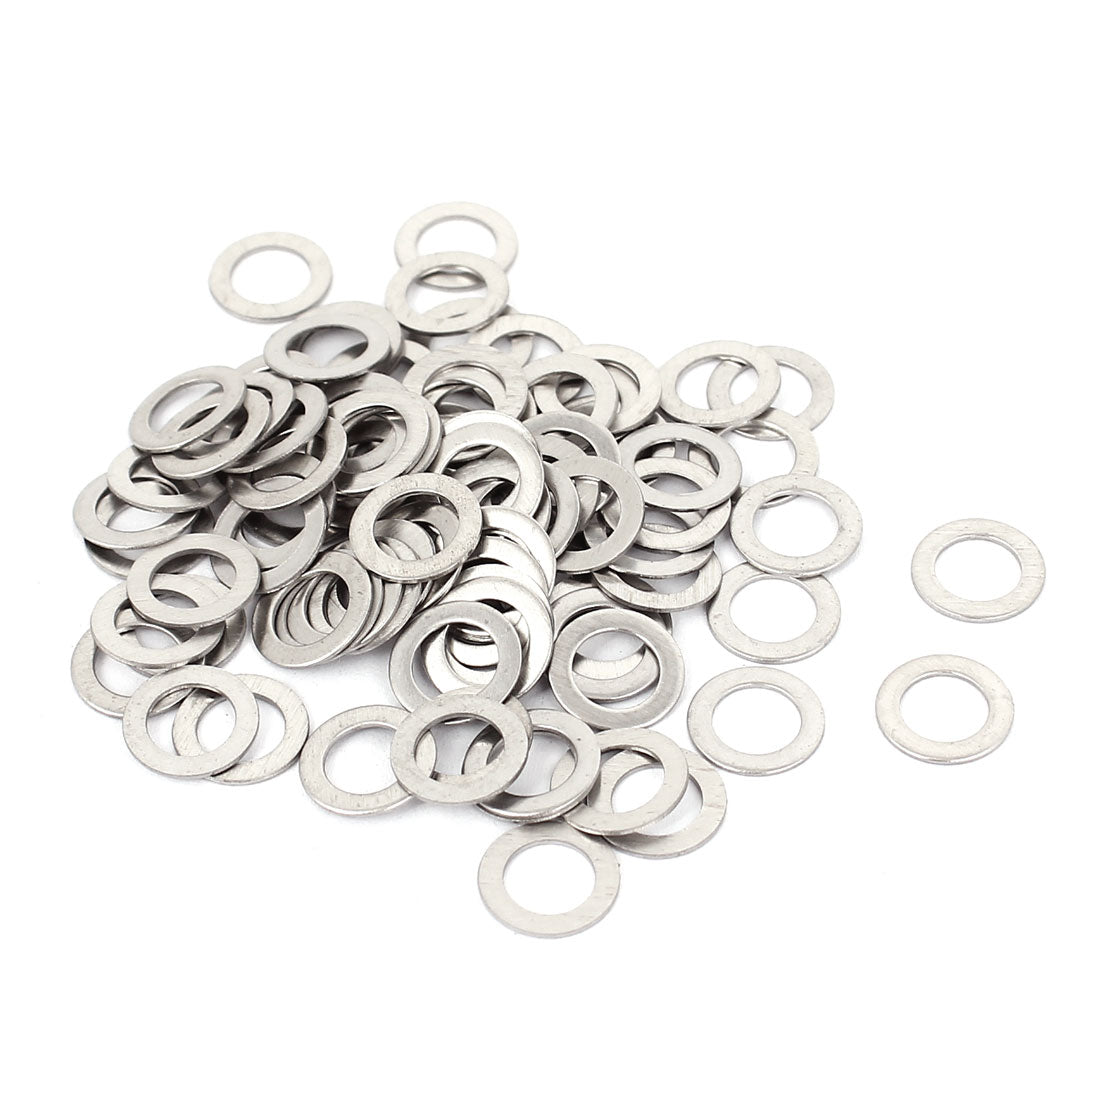 uxcell Uxcell 100Pcs M6x10mmx0.5mm Stainless Steel Metric Round Flat Washer for Bolt Screw